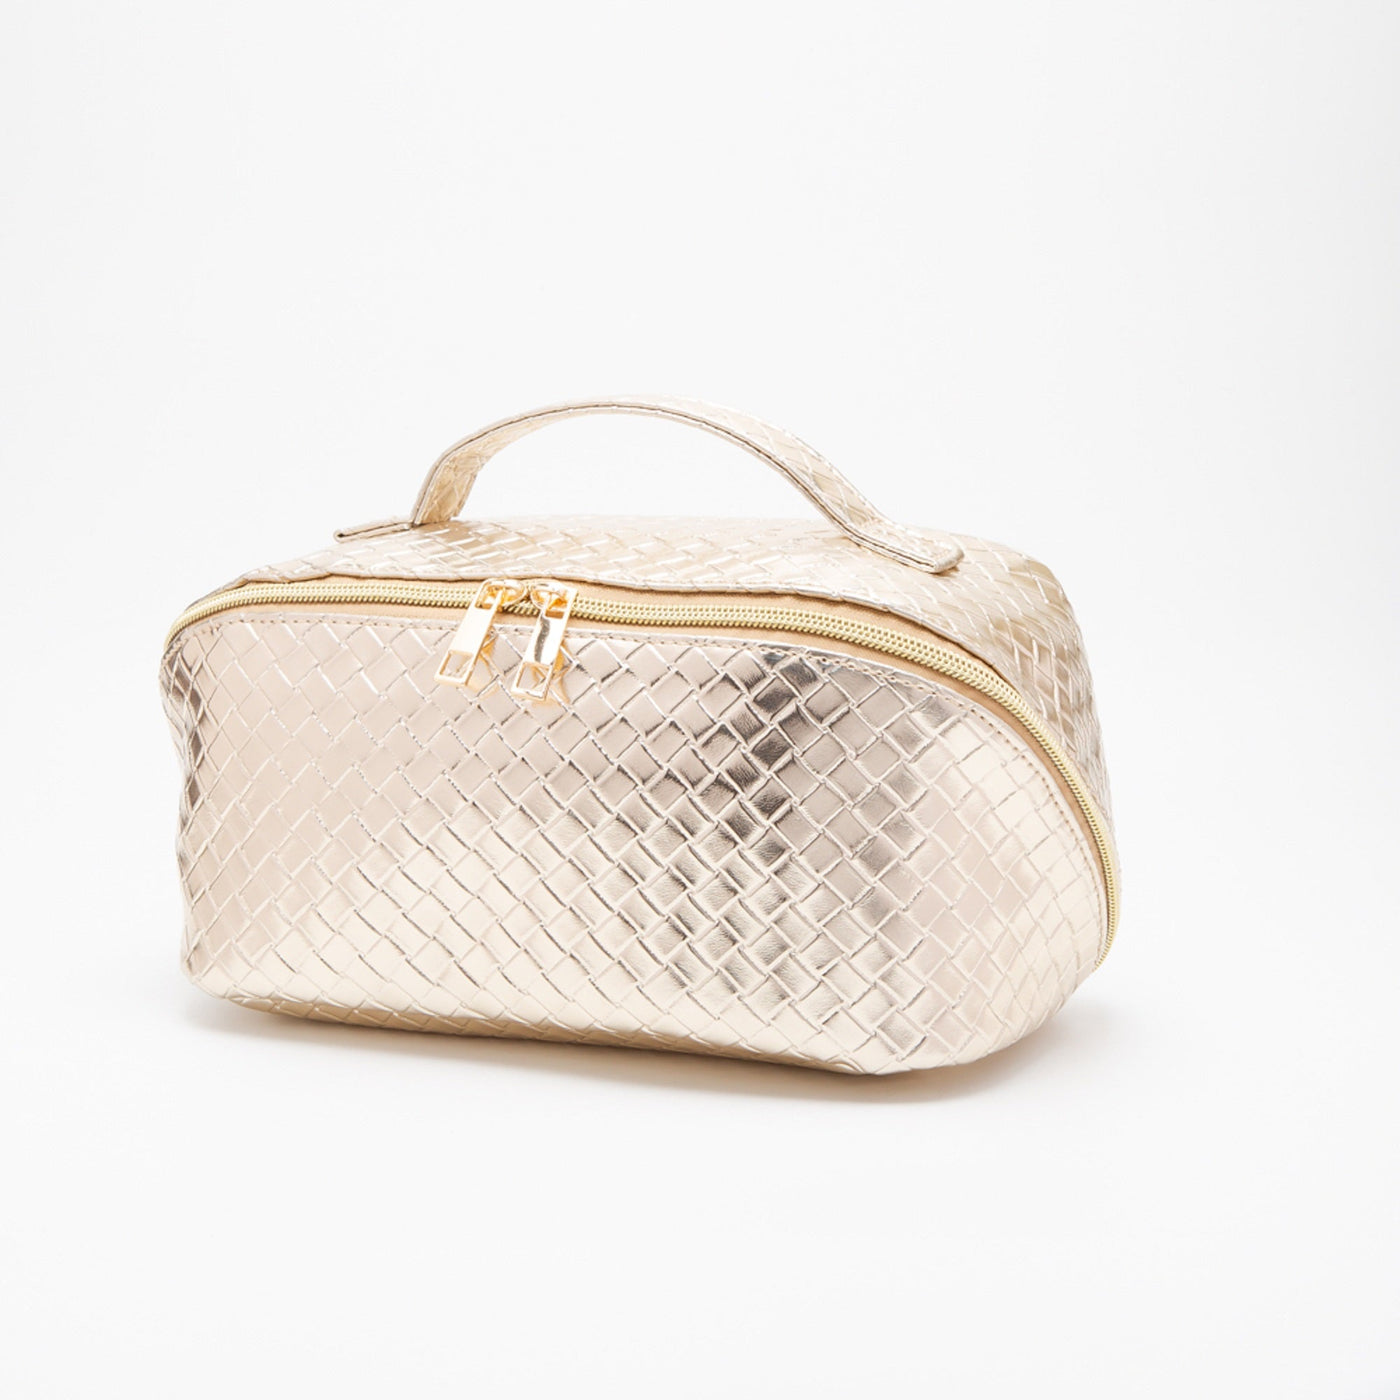 TG10541 Trixie Woven Leather Makeup/Toiletry Bag